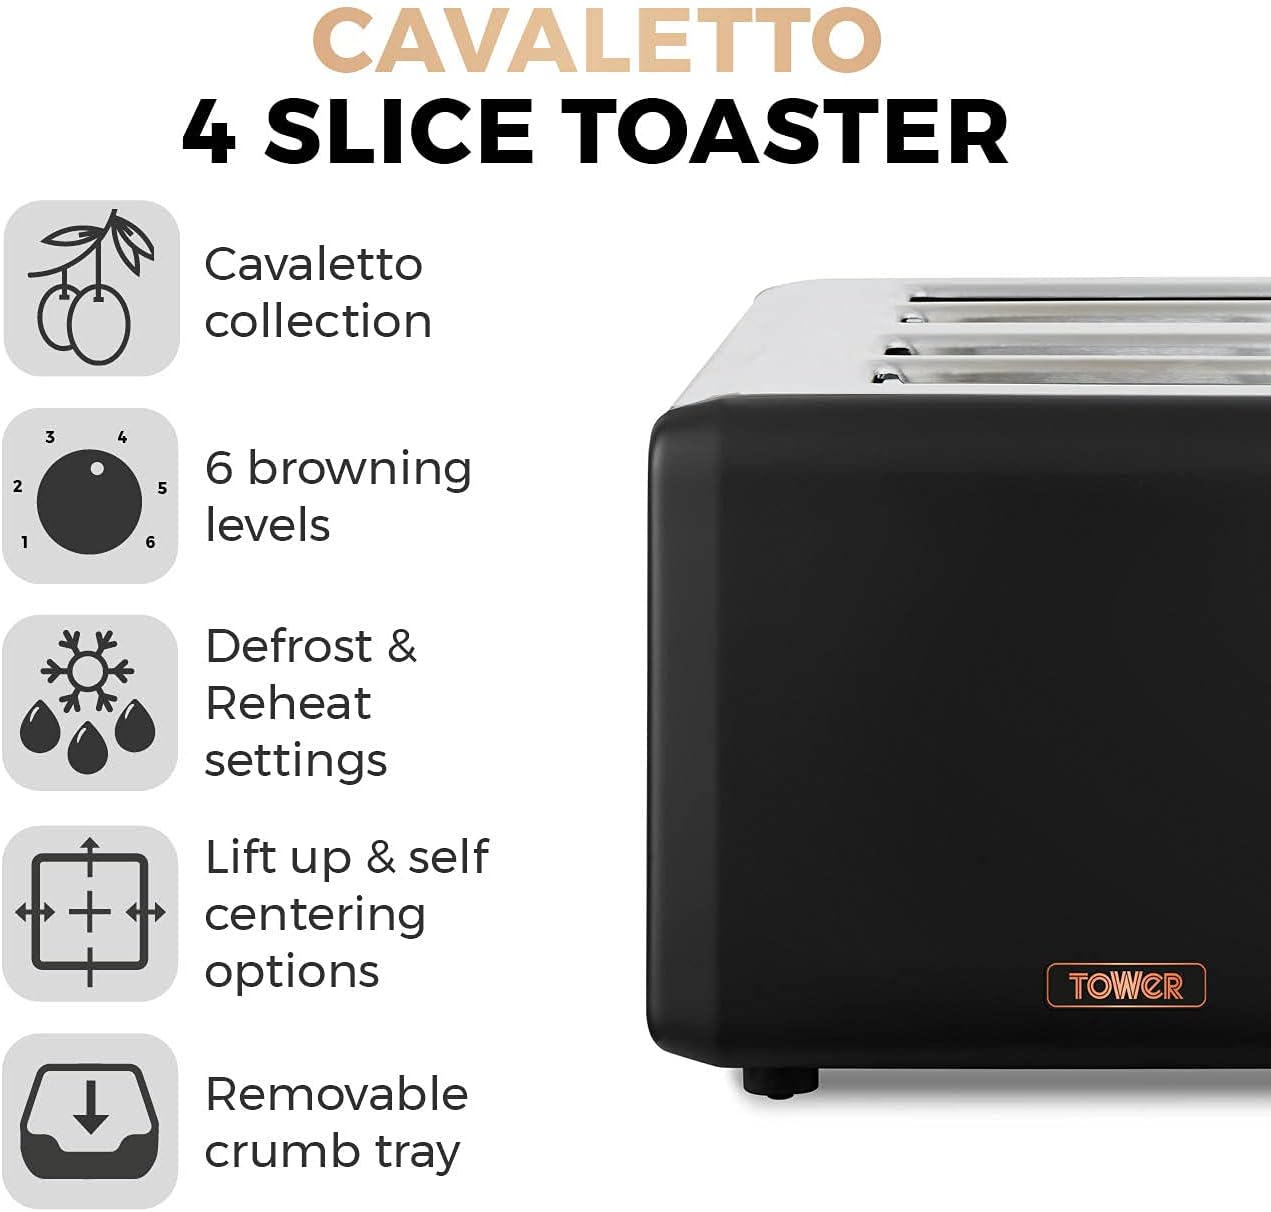 Tower T20051RG Cavaletto 4-Slice Toaster with Defrost/Reheat, Stainless Steel, 1800 W, Black and Rose Gold 8829